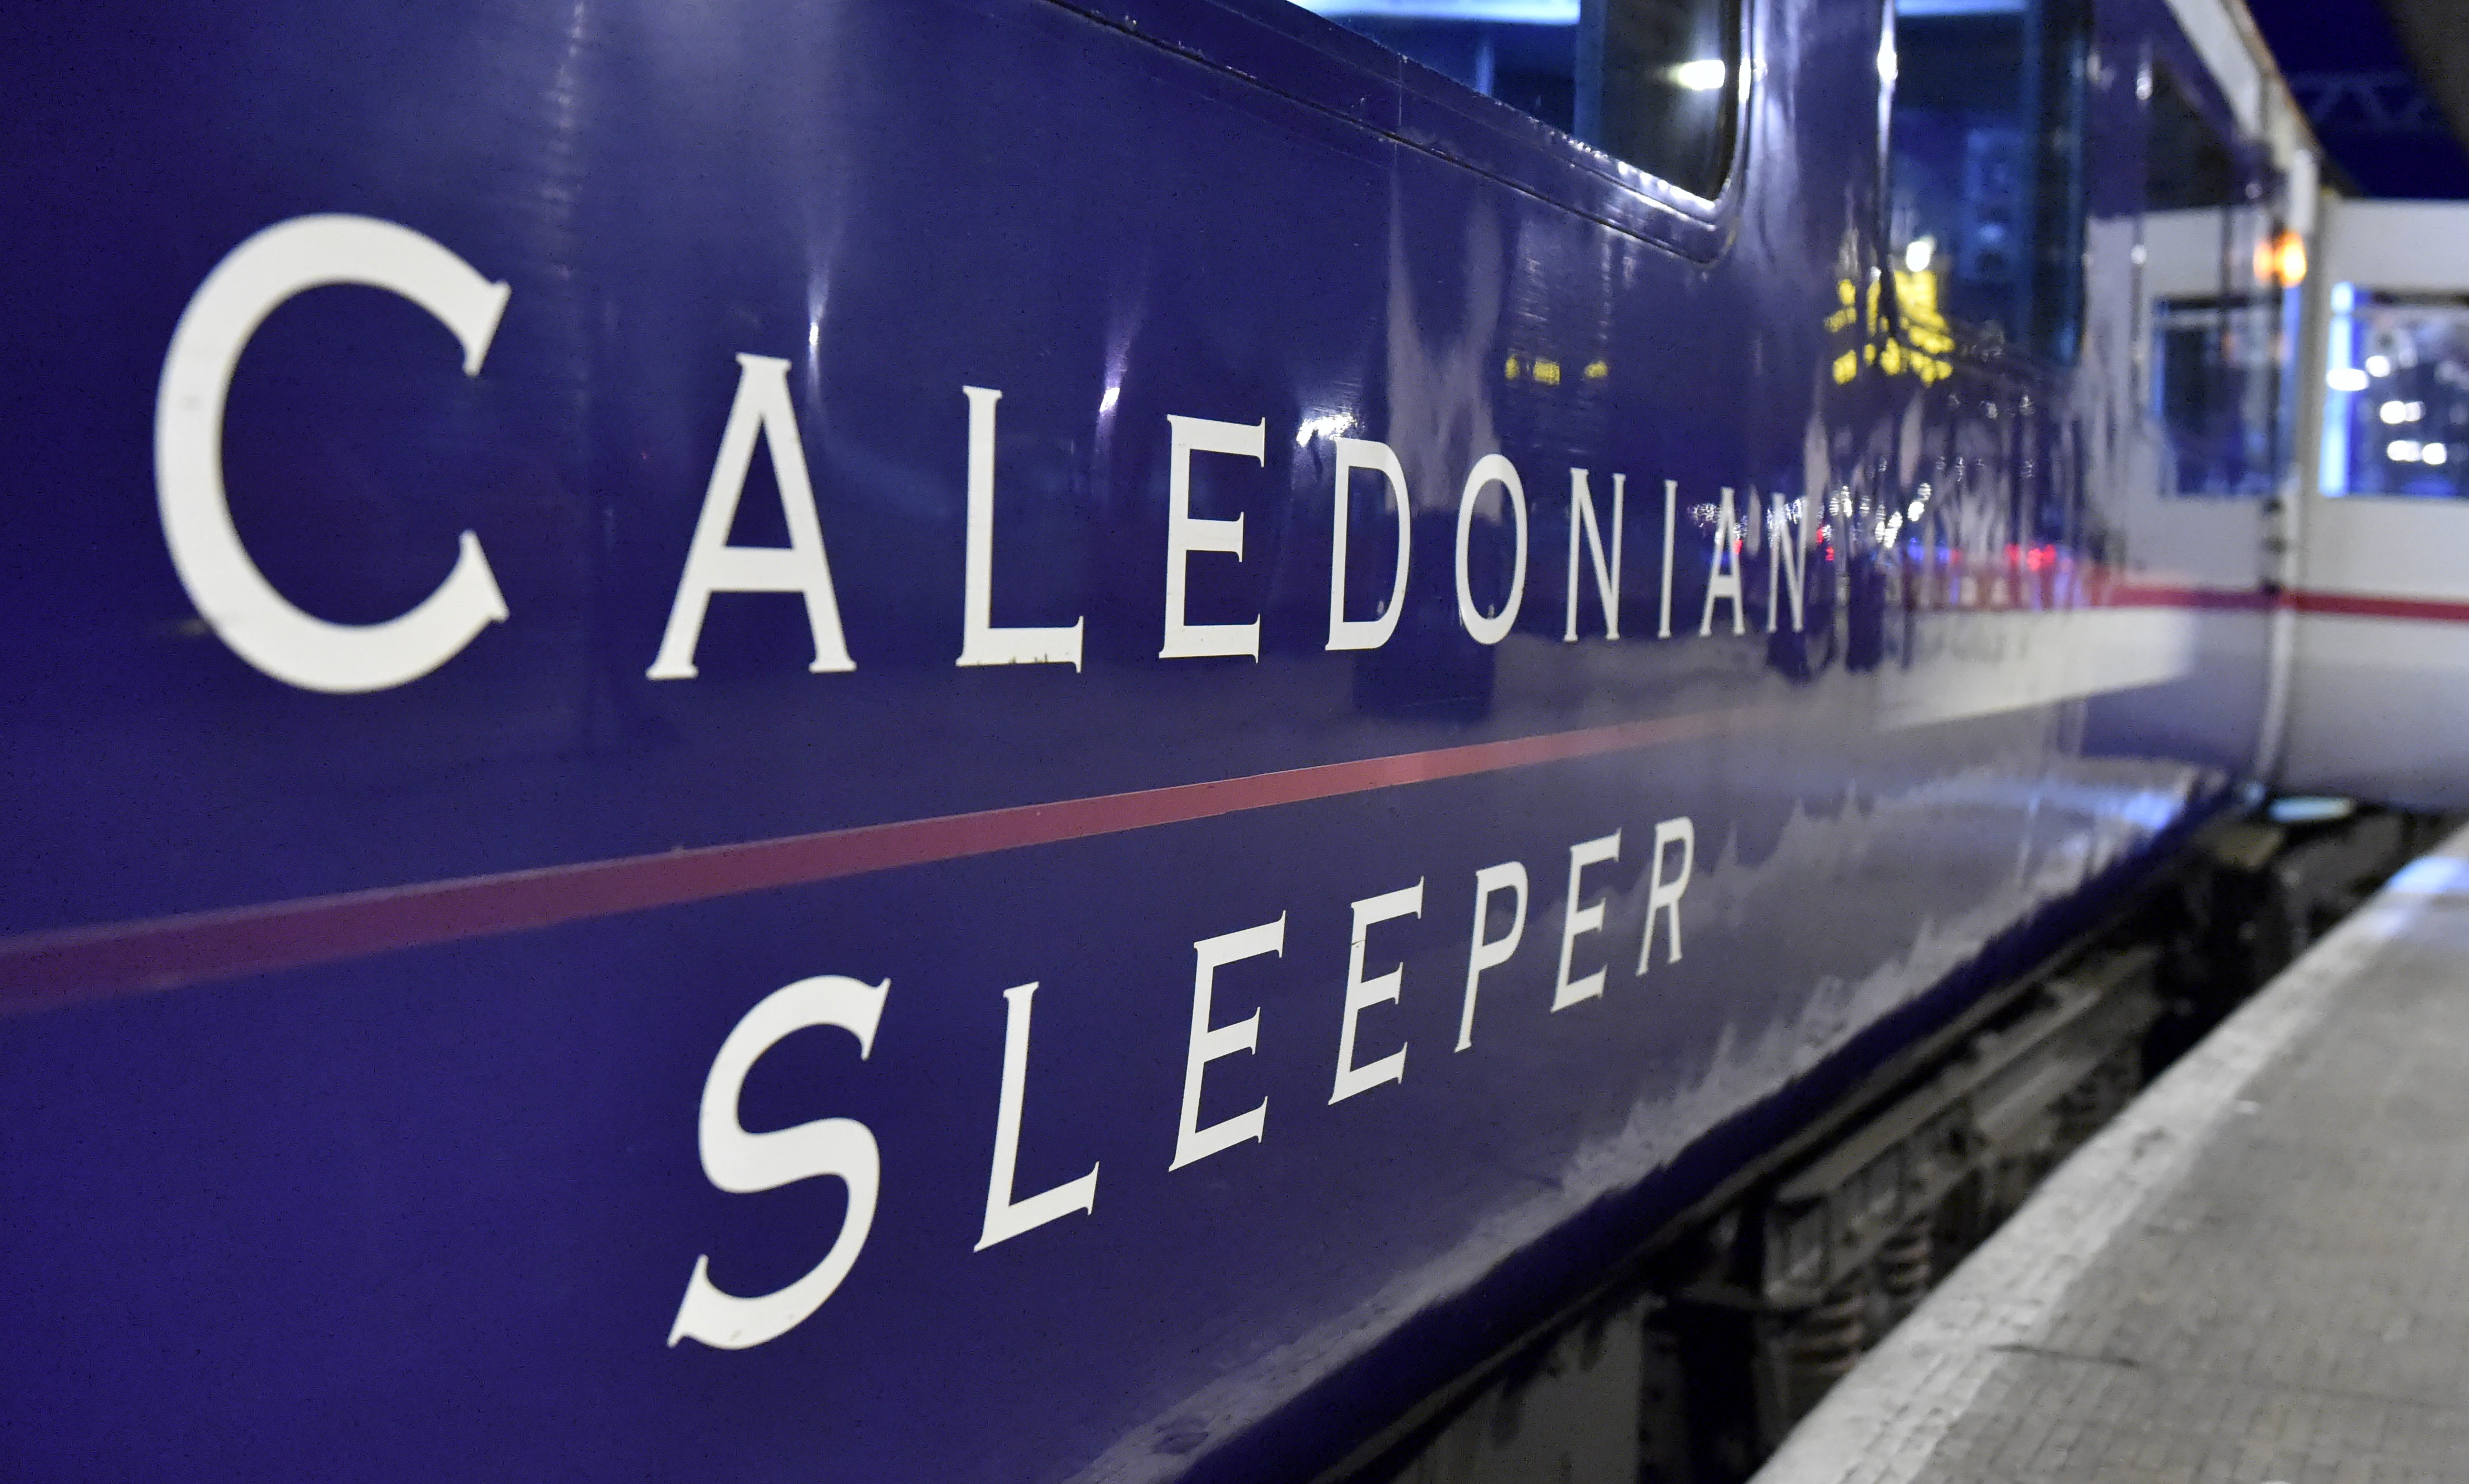 Caledonian Sleeper staff are set to strike this weekend